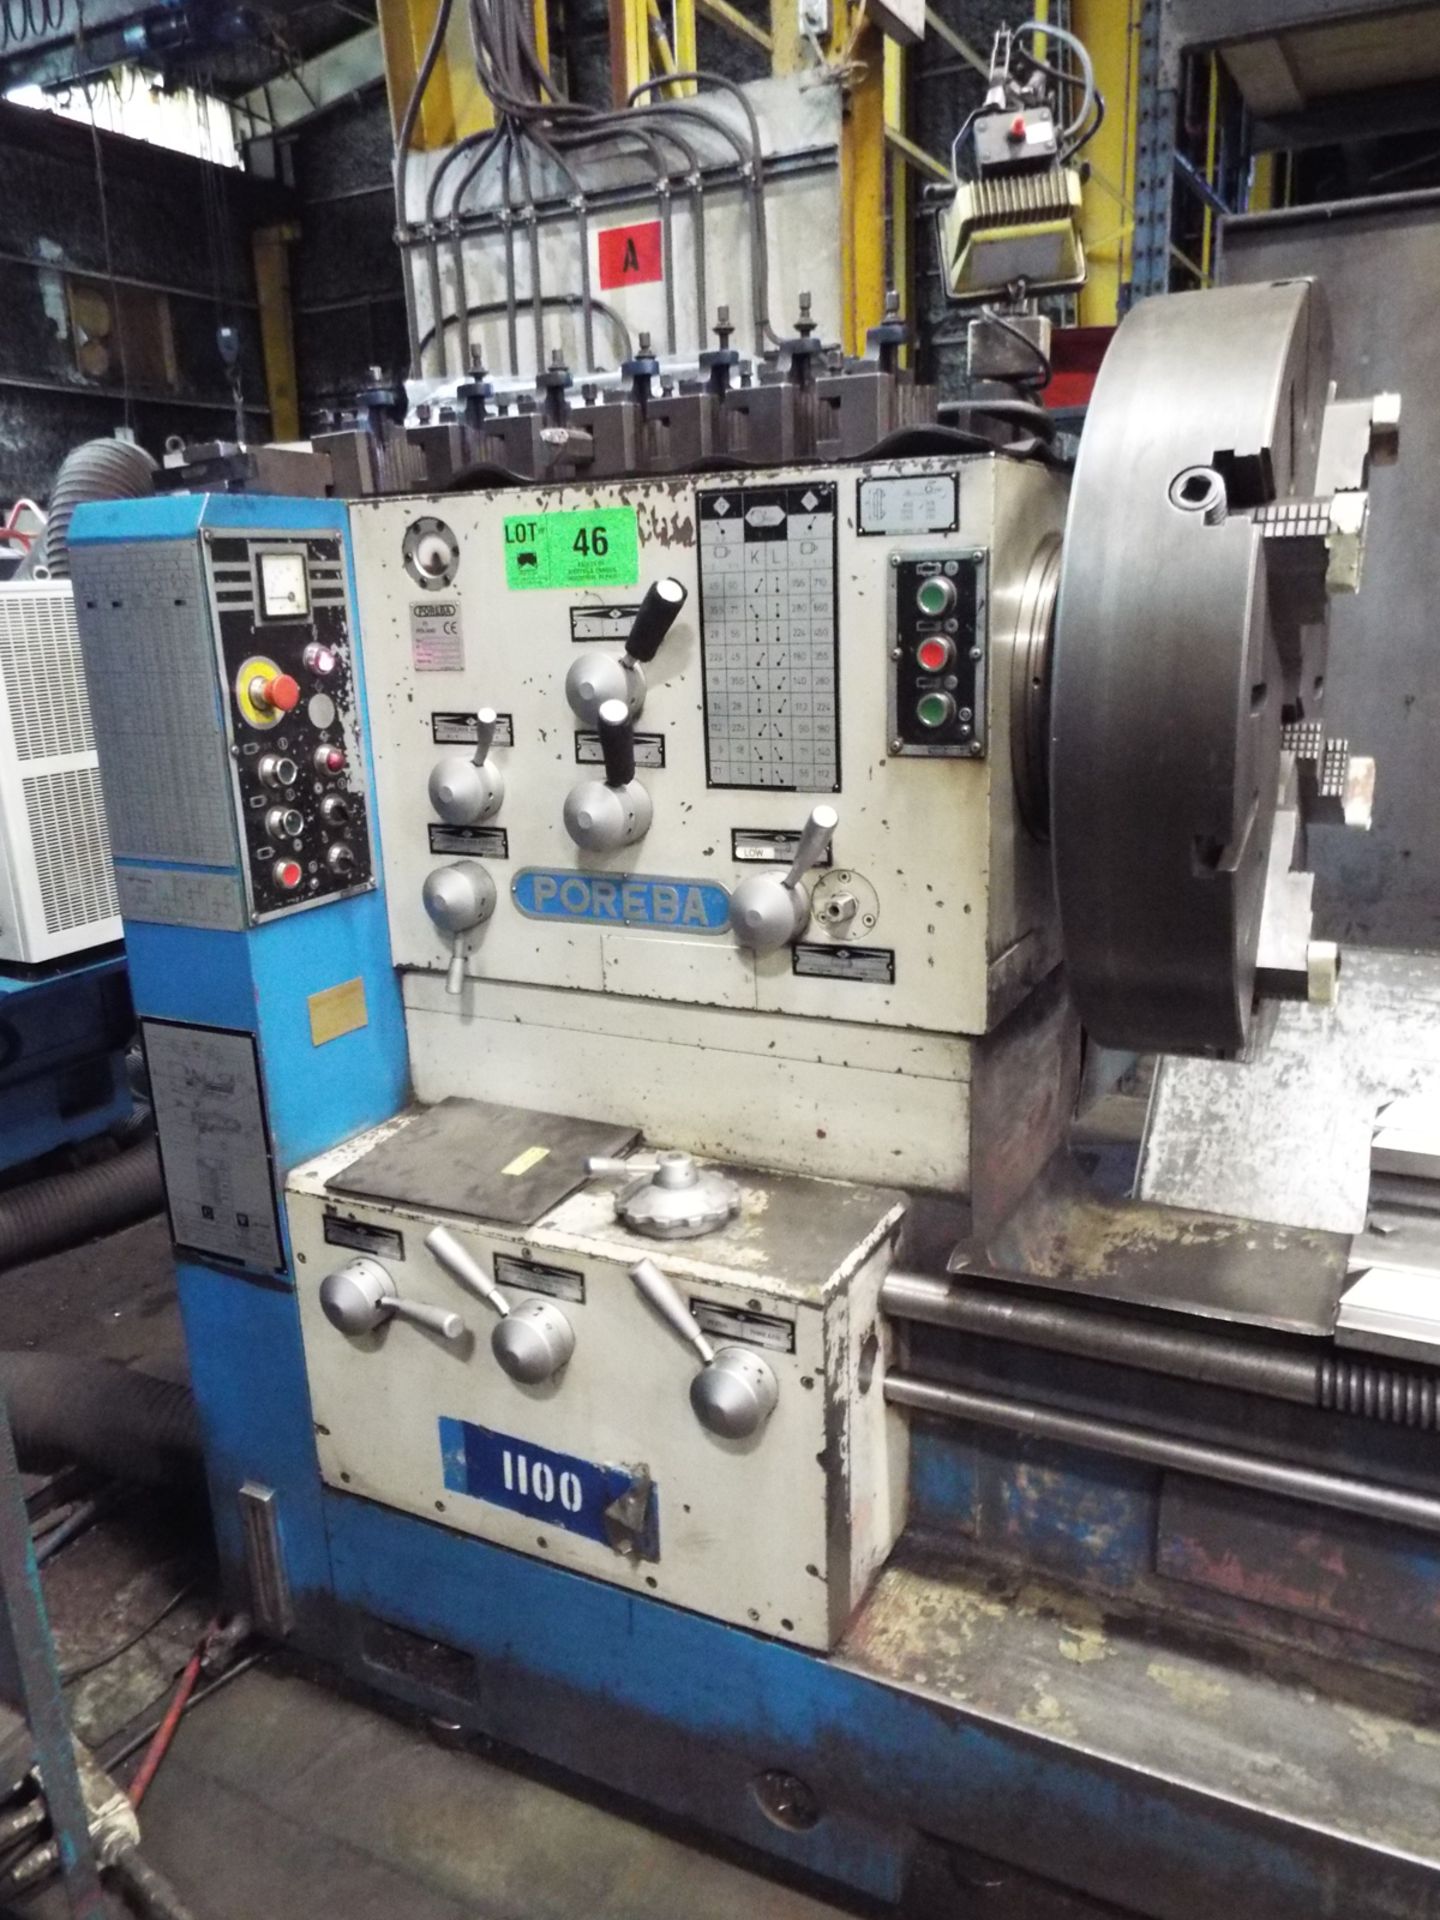 POREBA TPK 110X6 GAP BED ENGINE LATHE WITH 44" SWING OVER BED, 250" BETWEEN CENTERS, 4" SPINDLE - Image 3 of 8